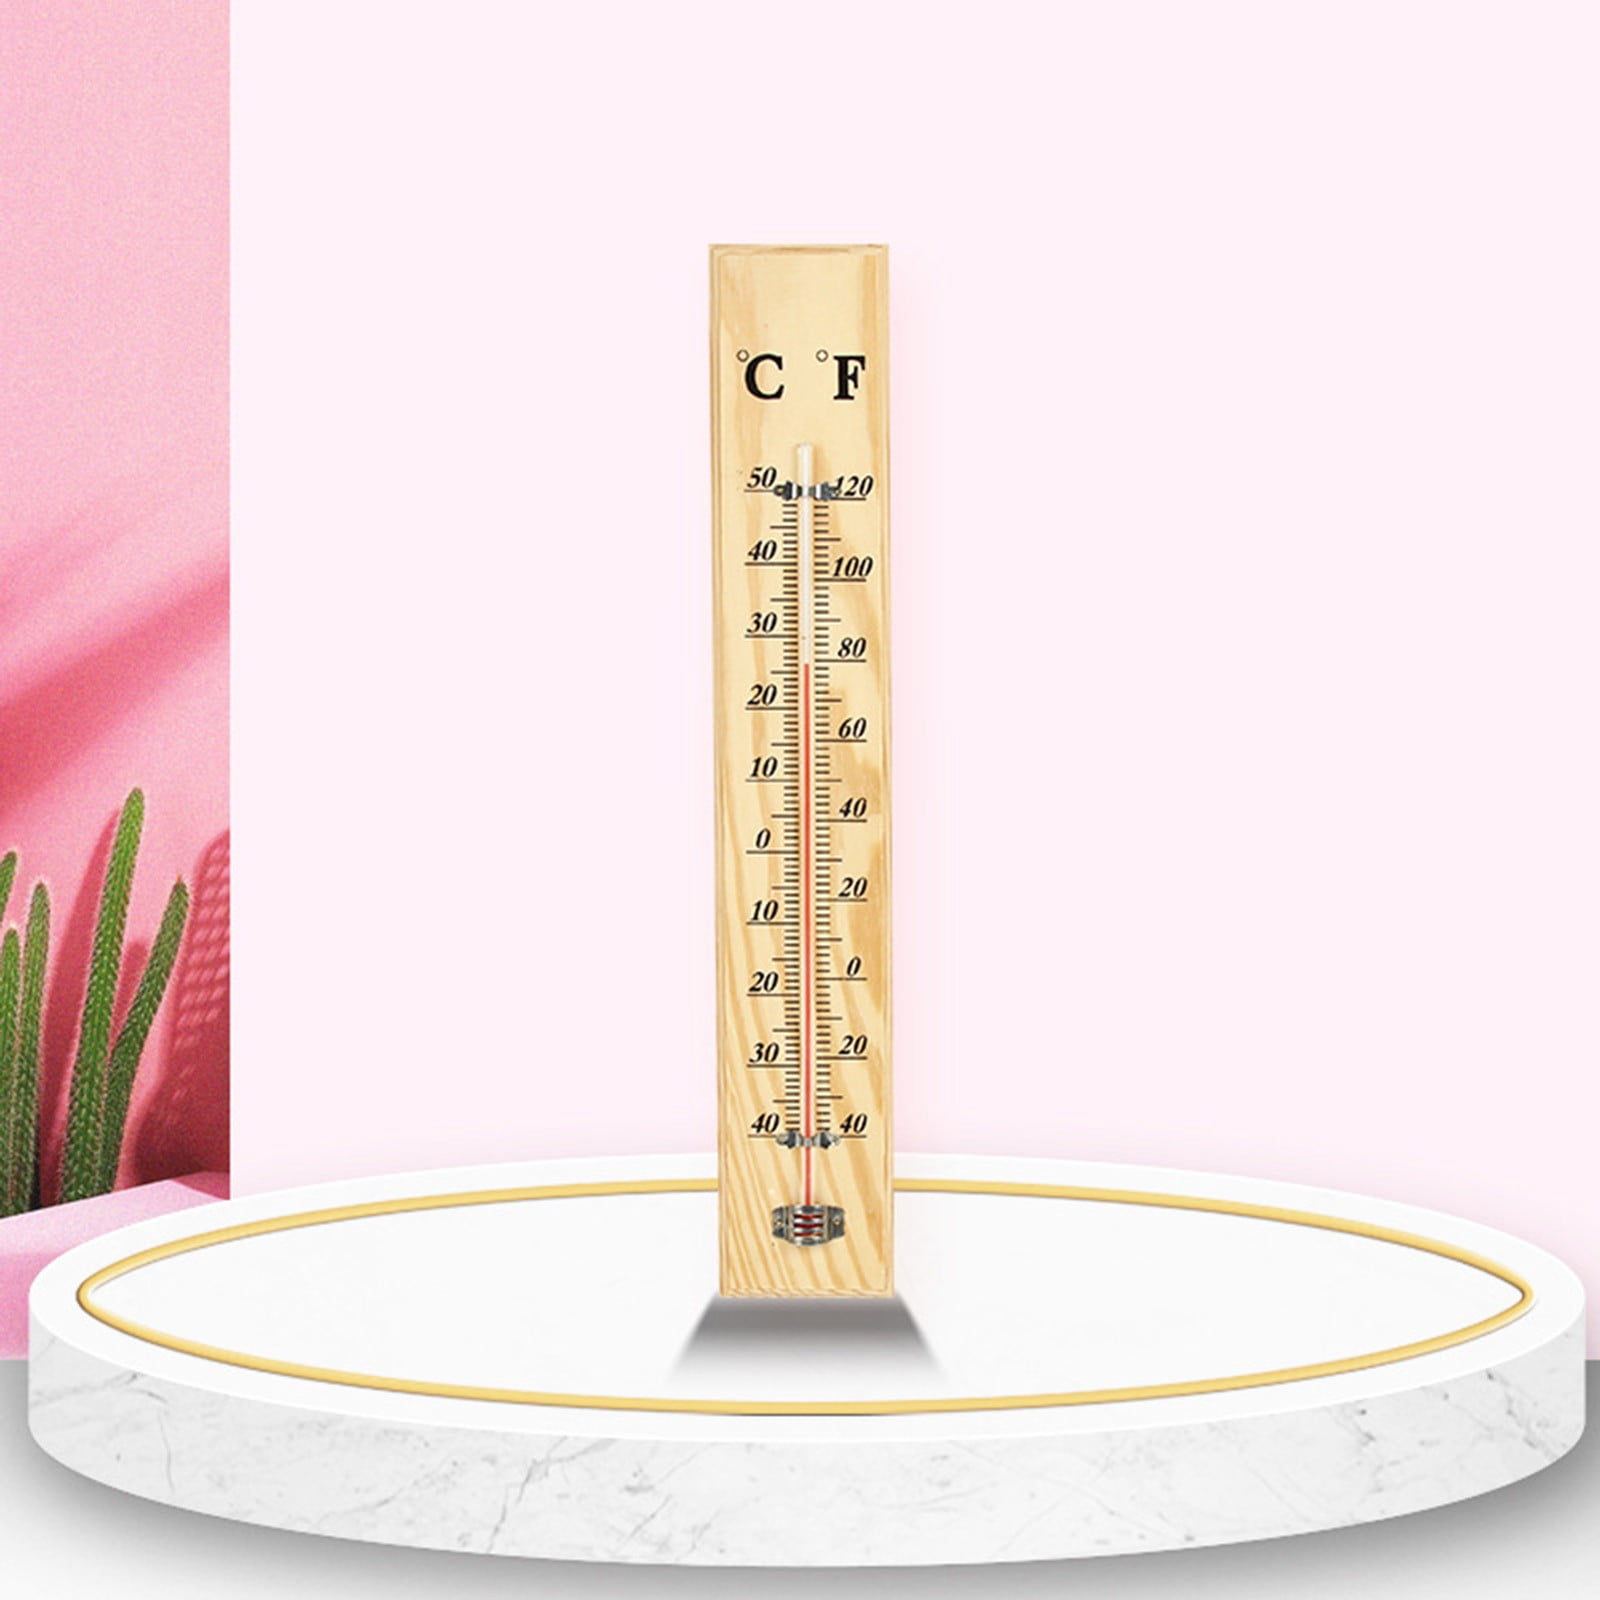 GLFSILL 2/10X Wall Thermometer Indoor Outdoor Home Office Garden